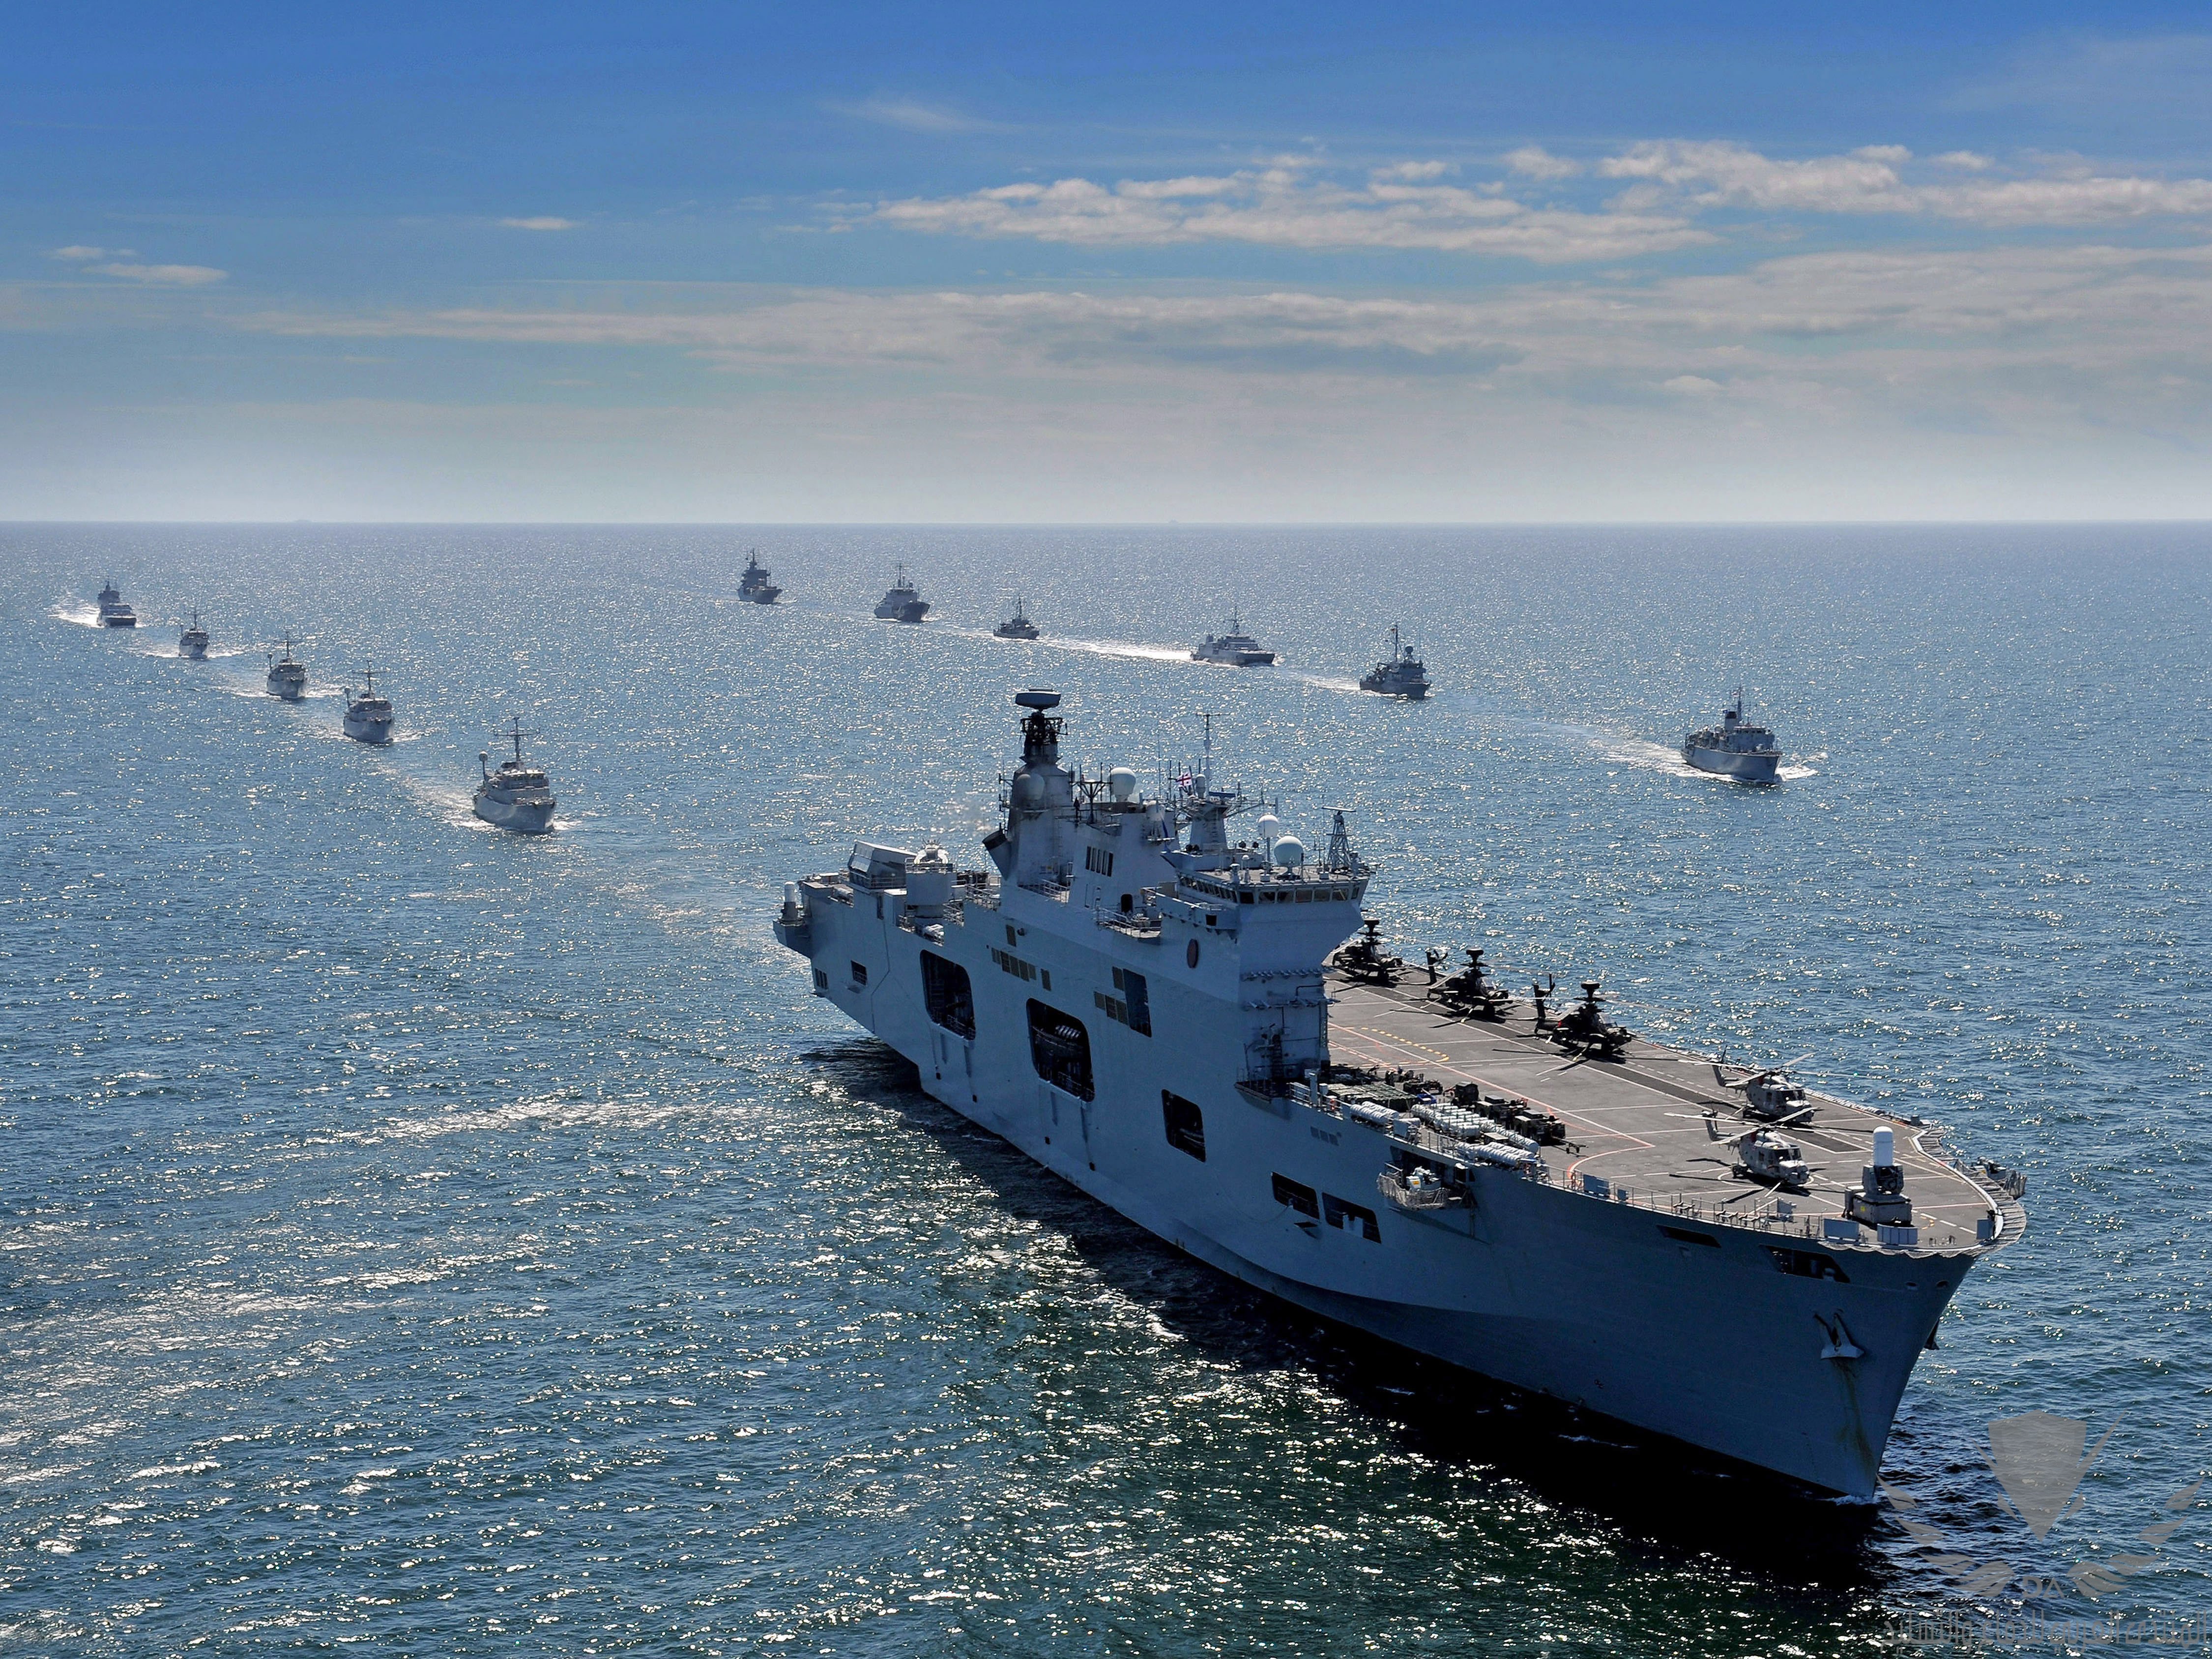 Pictured_is_The_Helicopter_Carrier_HMS_Ocean_during_Exercise_BALTOPS_2015._MOD_45159995.jpg